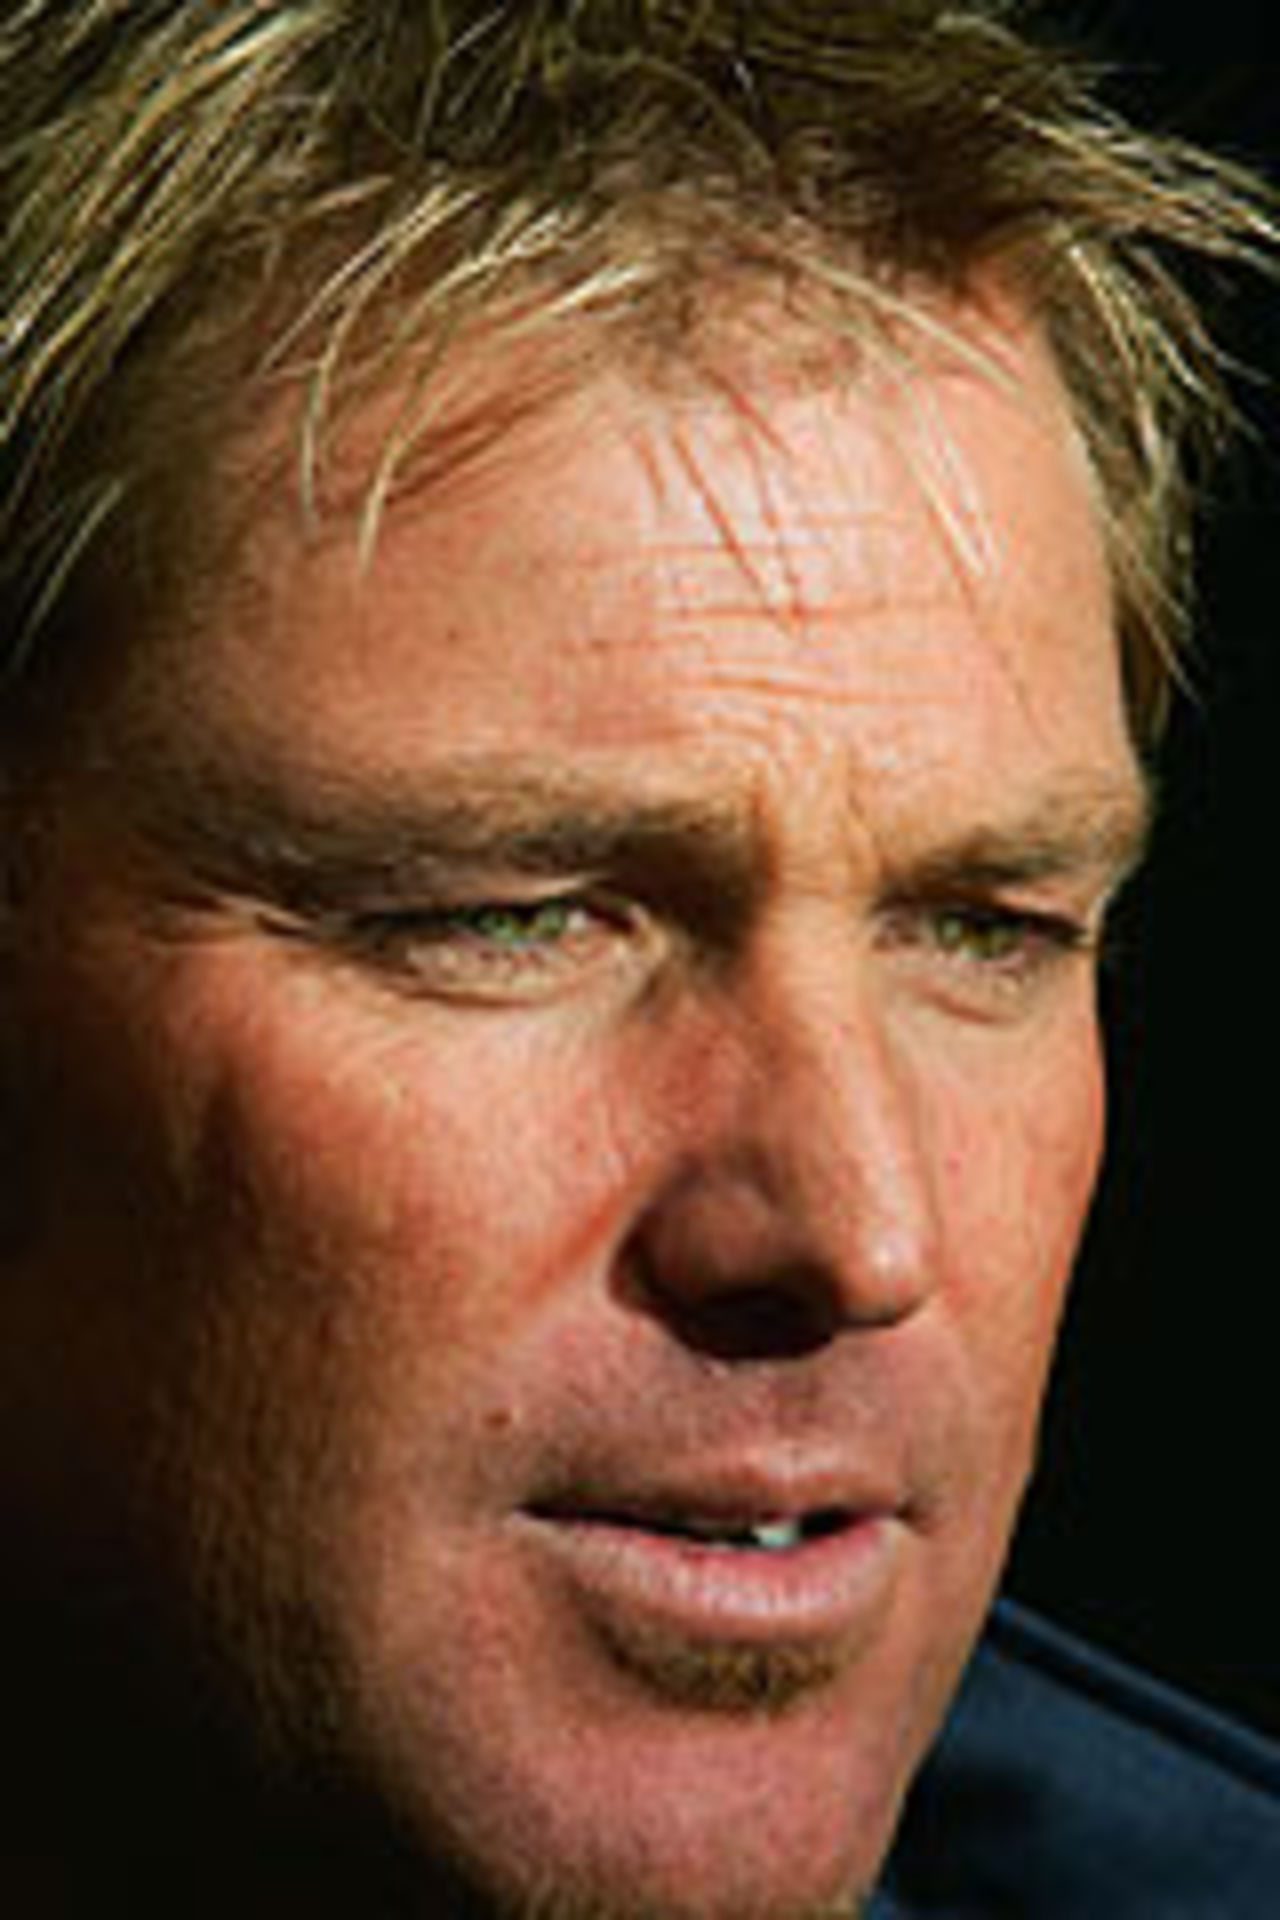 Shane Warne at a press conference, Christchurch, March 8, 2005